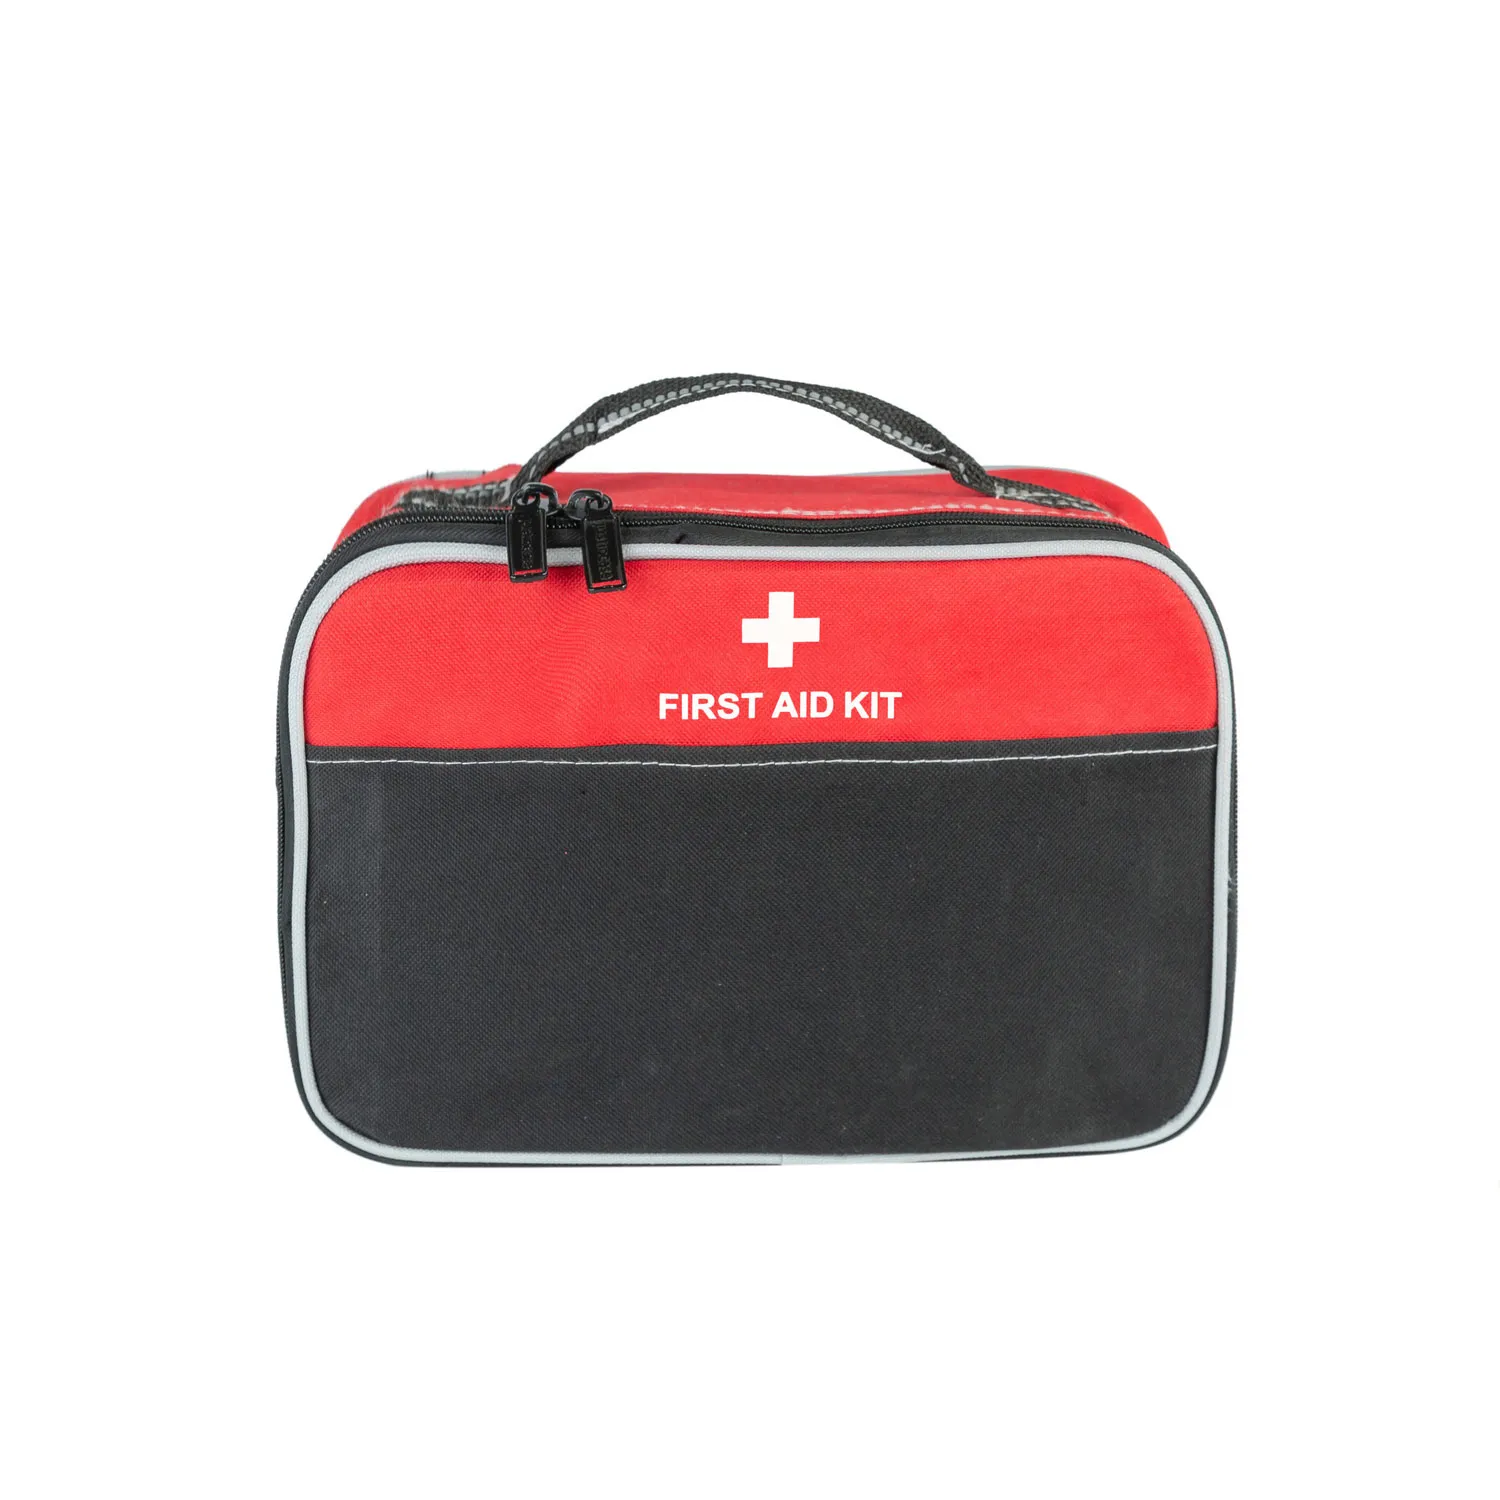 Equipment of car first aid kit